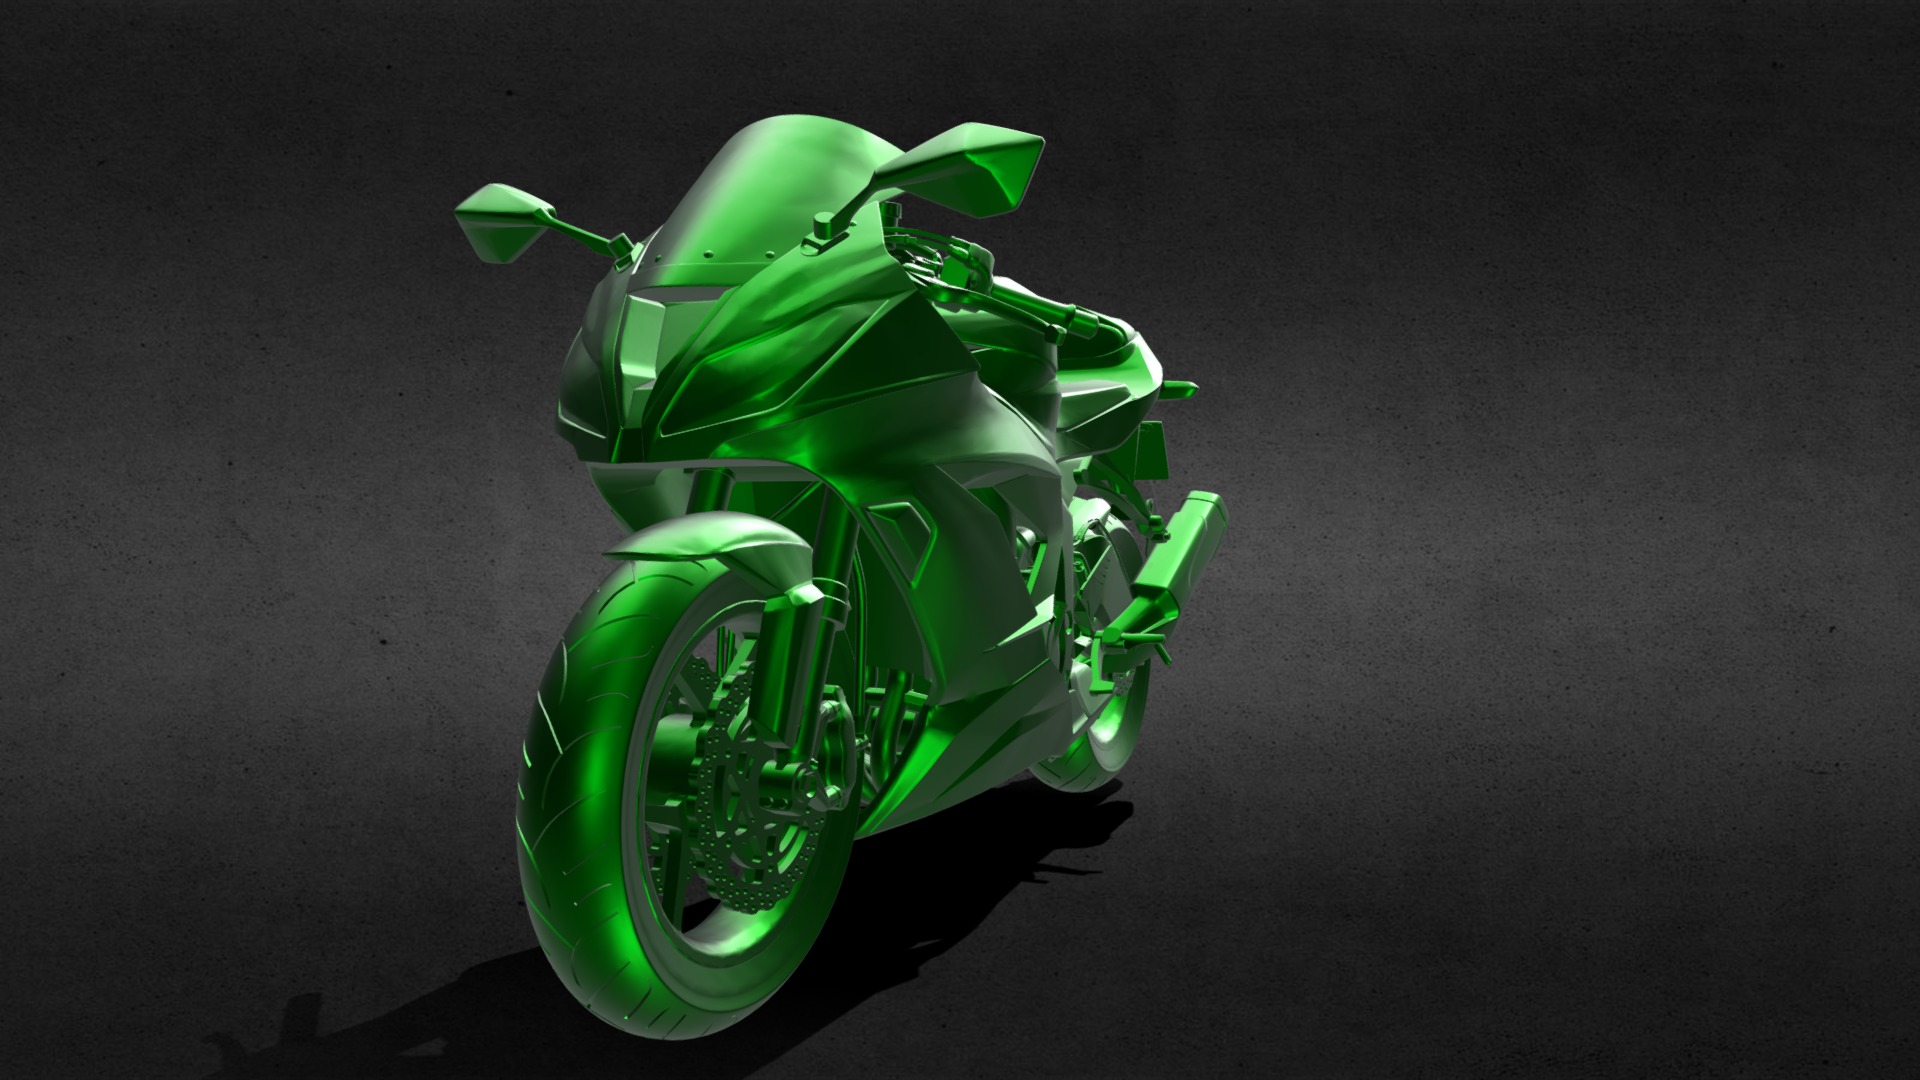 3D model Kawasaki Ninja ZX-6R 636 For Printing - This is a 3D model of the Kawasaki Ninja ZX-6R 636 For Printing. The 3D model is about a green toy motorcycle.